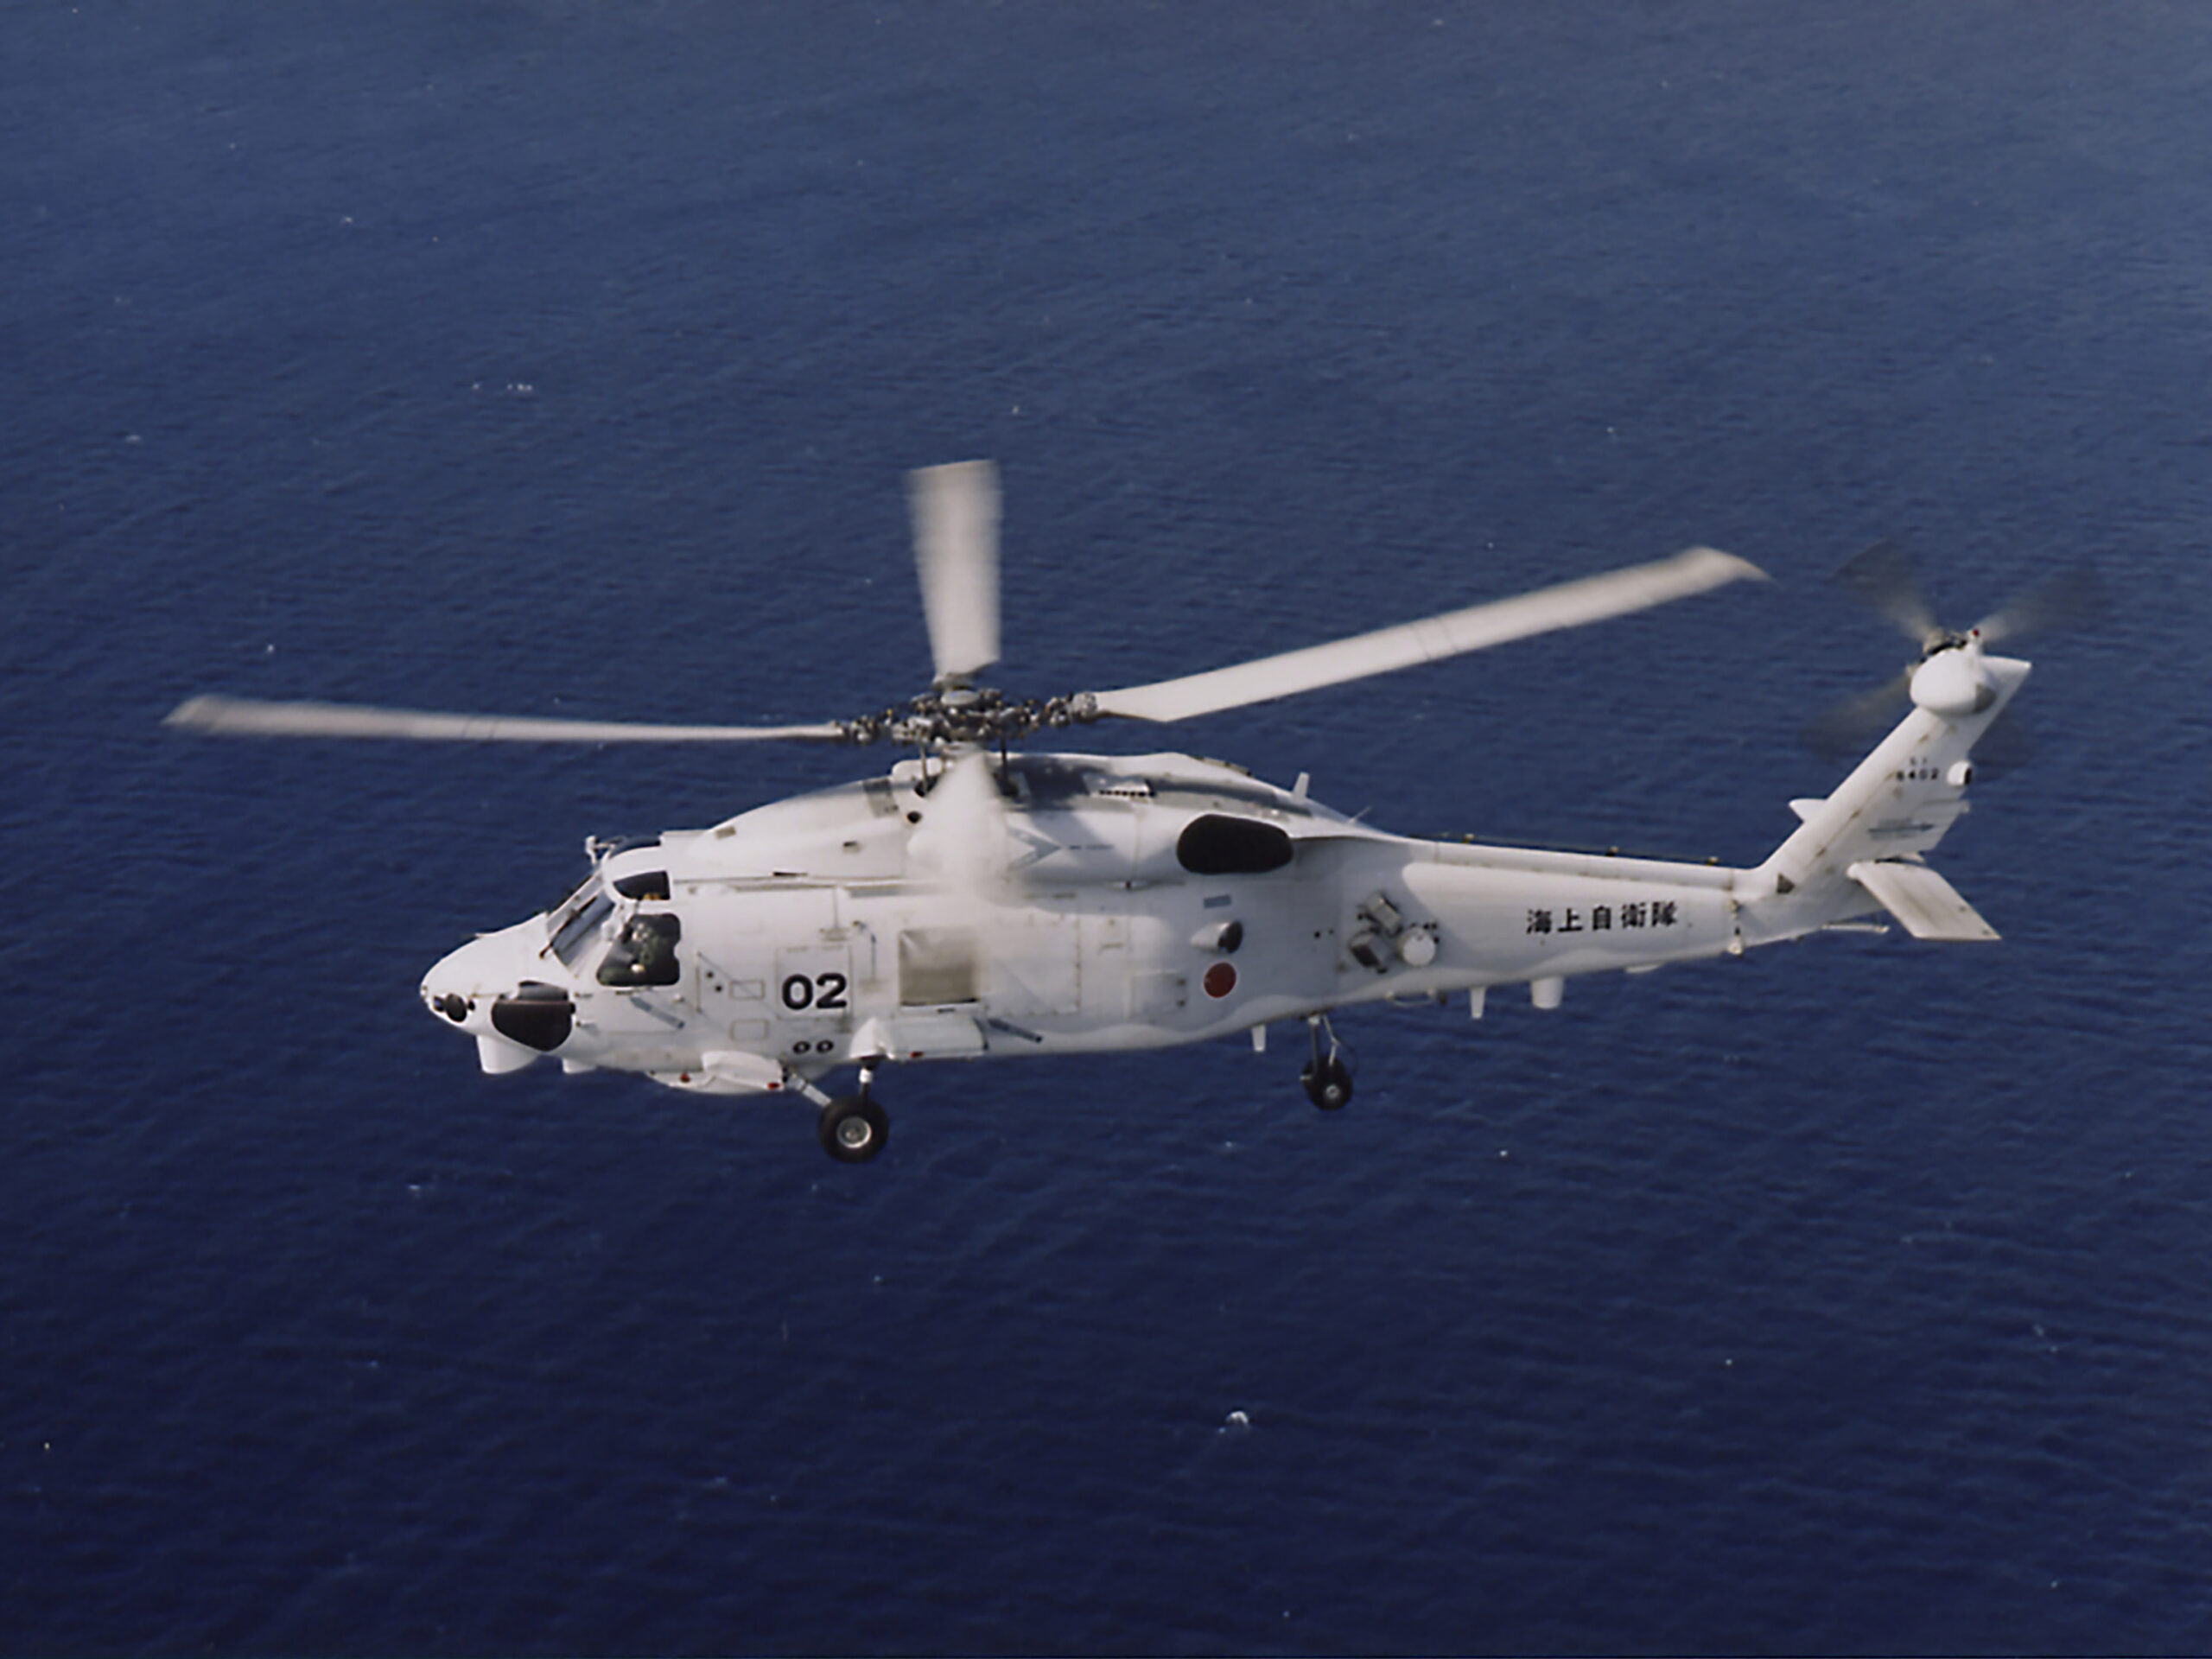 2 Japanese navy helicopters crash in the Pacific Ocean — 1 dead and 7 missing